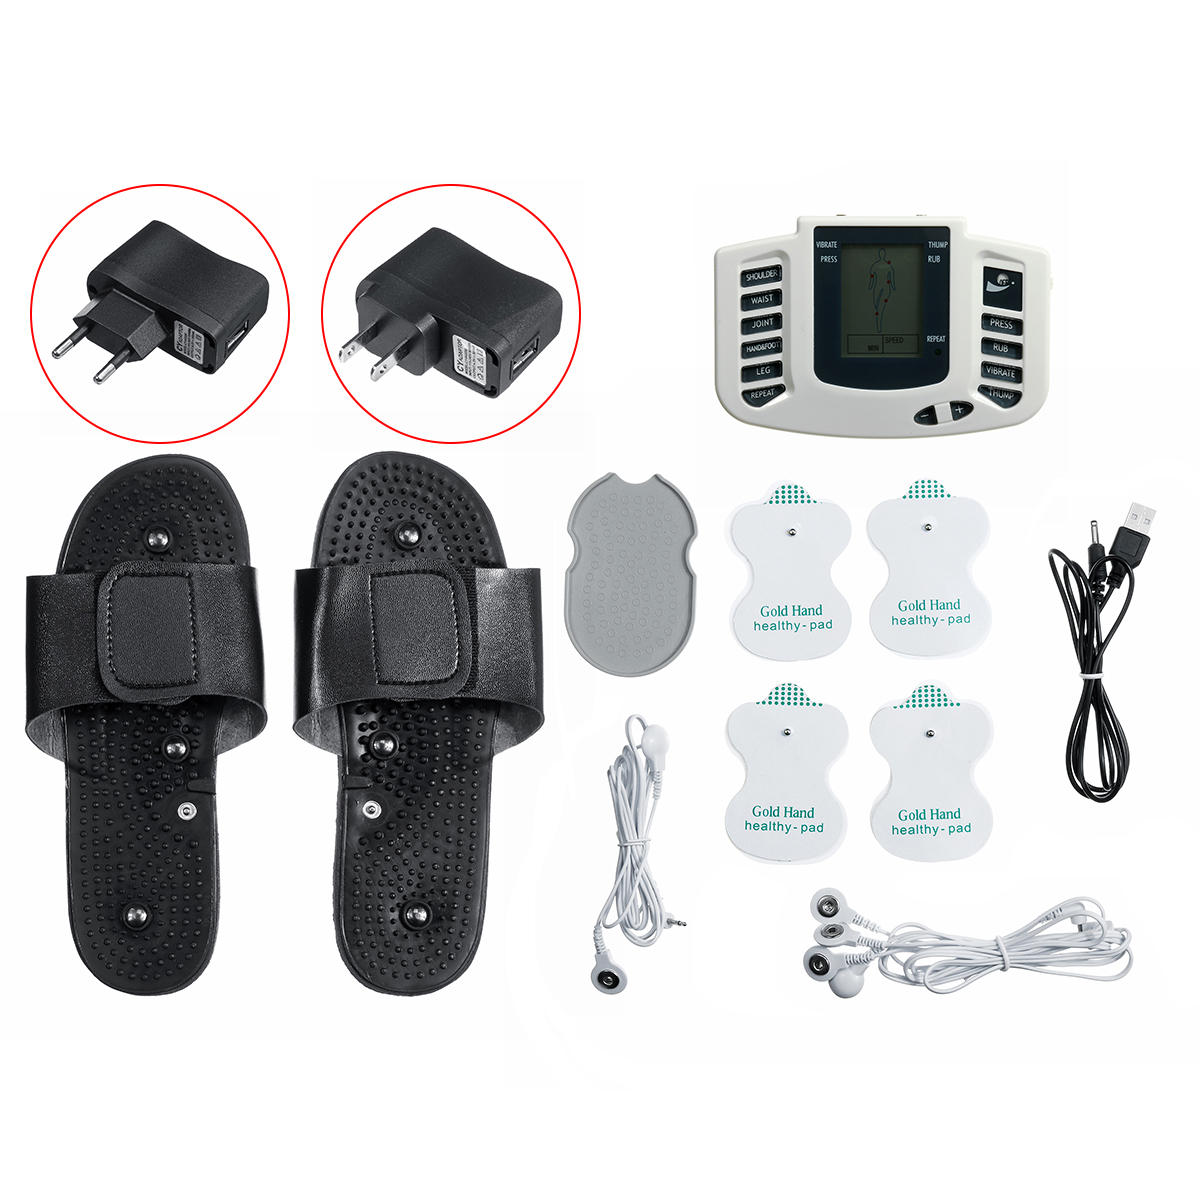 Image of JR-309 Display Electronic Stimulator Massager Muscle Body Massage Relief 4 Modes Muscle Stimulator with Electrode Pads W